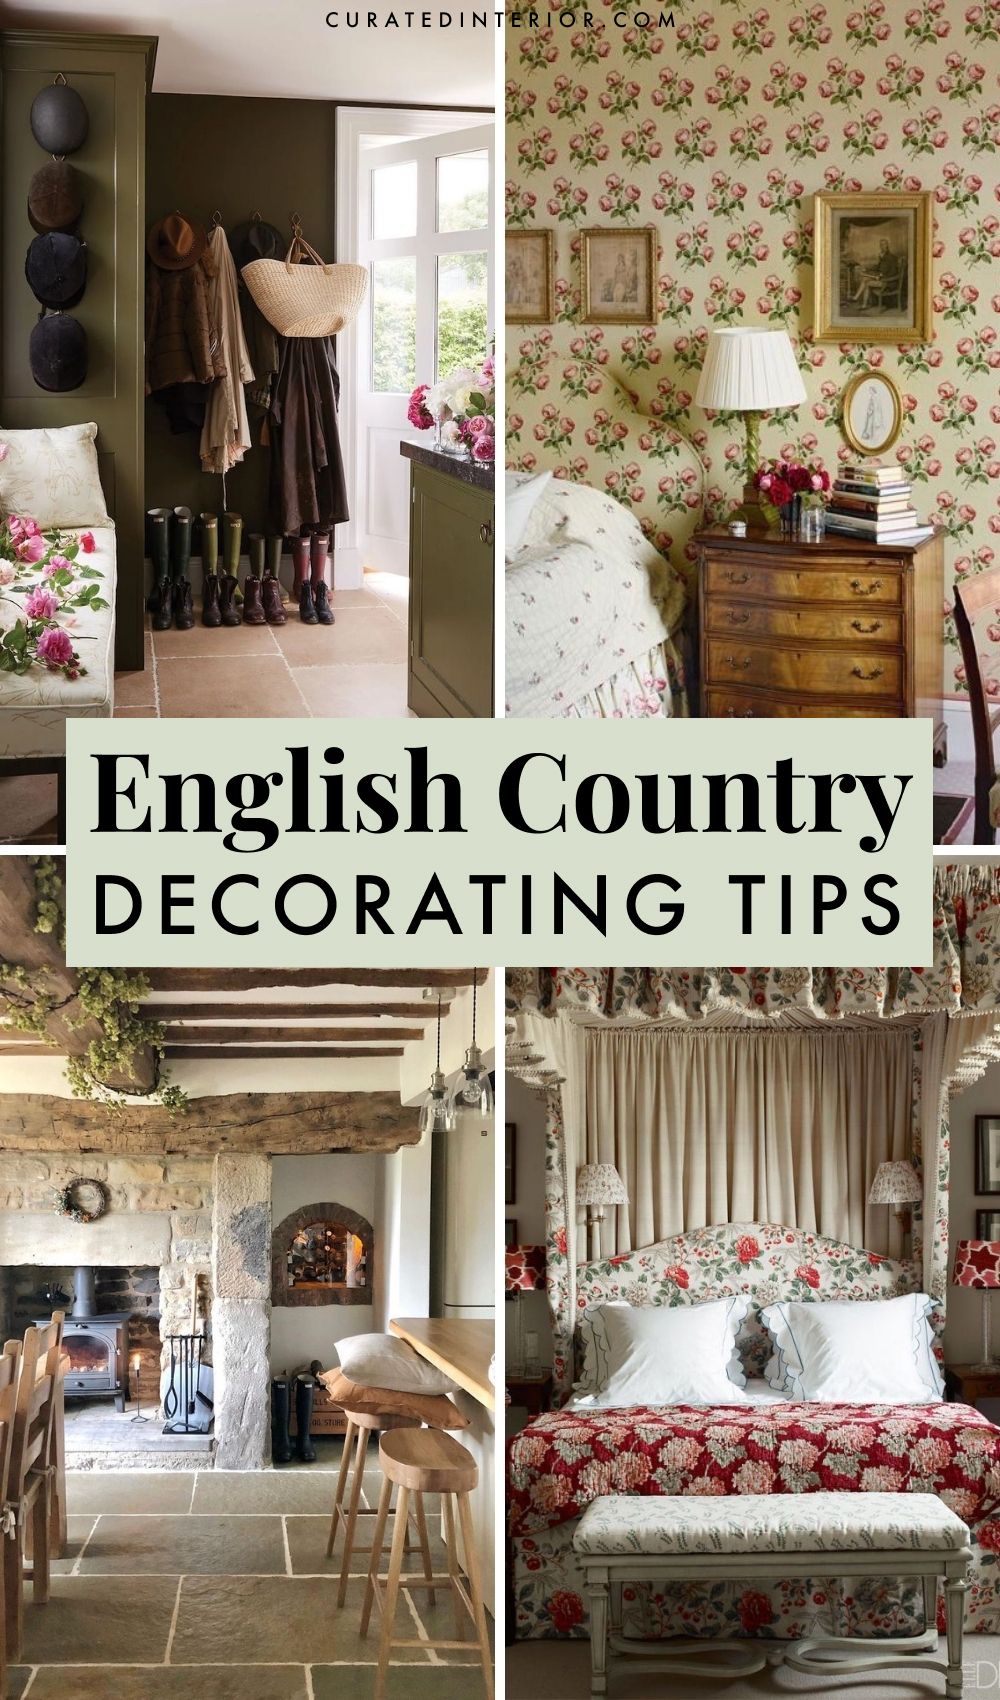 English Country Decorating Tips